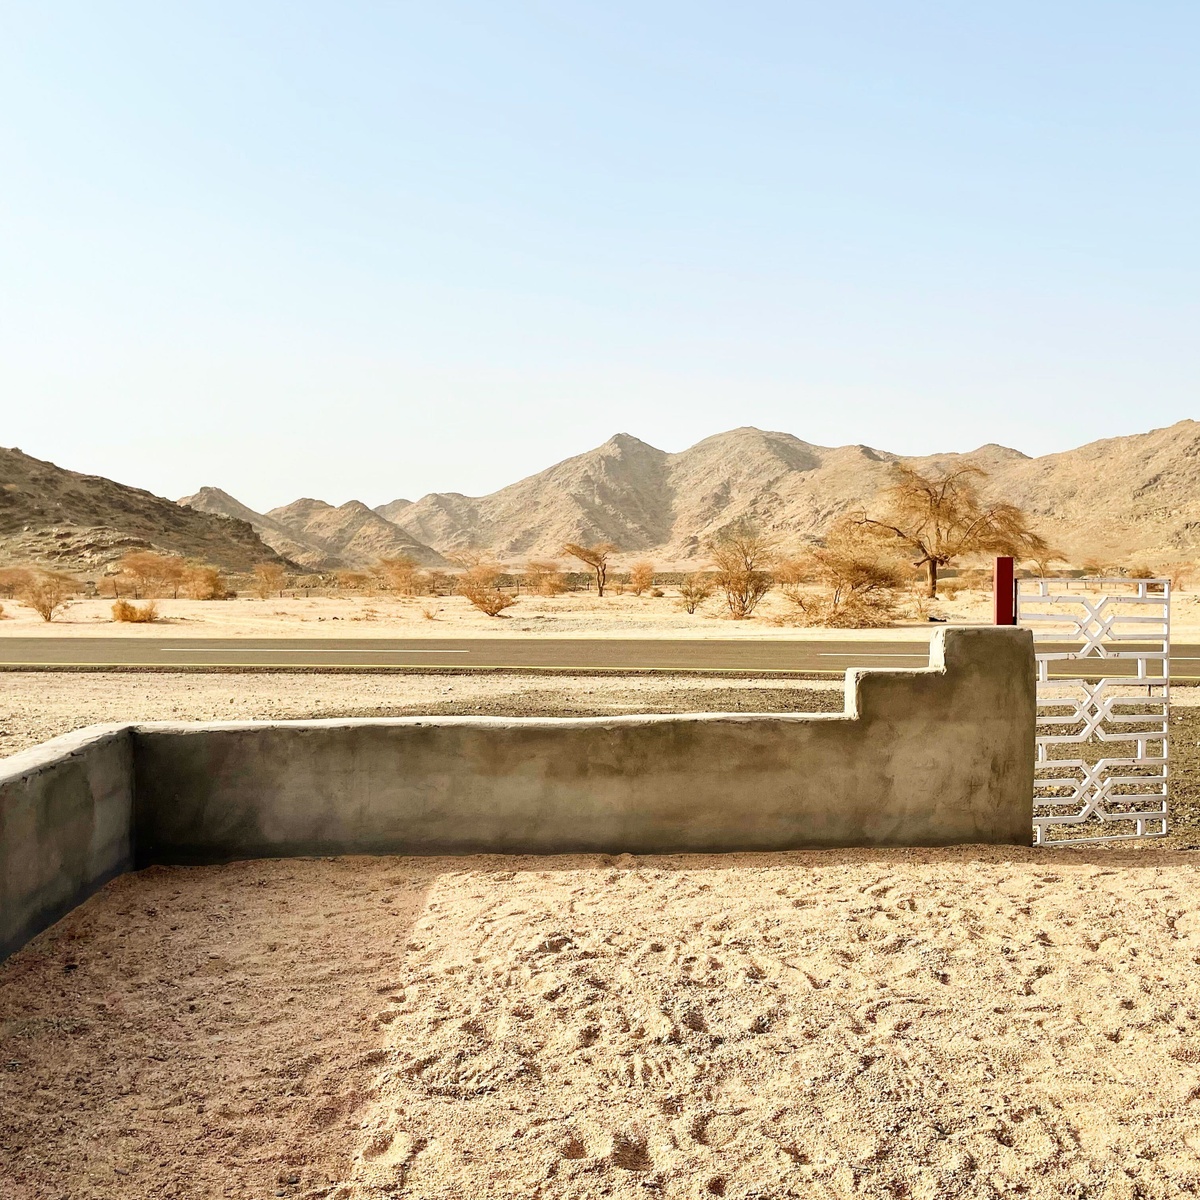 Process photograph from Waiting Upon, Sumayya Vally’s Course of Enquiry at A4, depicting a roadside mosque in Saudi Arabia. At the front, a low-wall enclosure with a gate. In the middle, a tarred road. In the back, various mountains.
